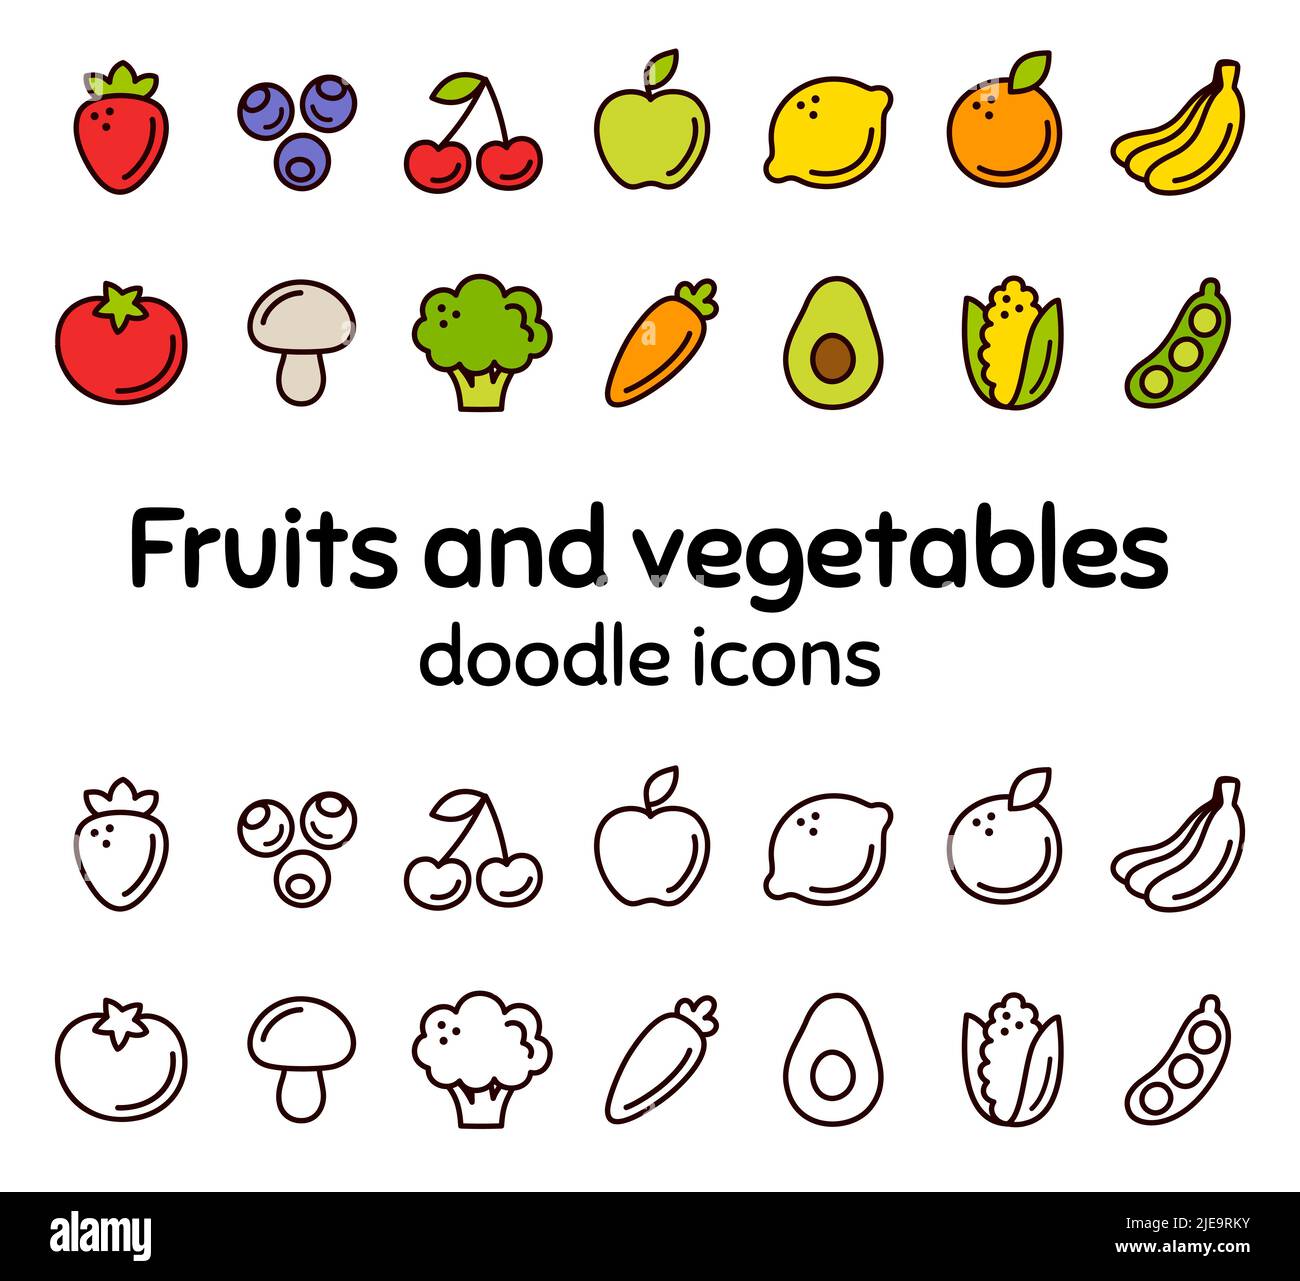 Cartoon hand drawn doodle style fruit and vegetable icons in two styles, color and black line. Cute simple pictograms, vector illustration set. Stock Vector